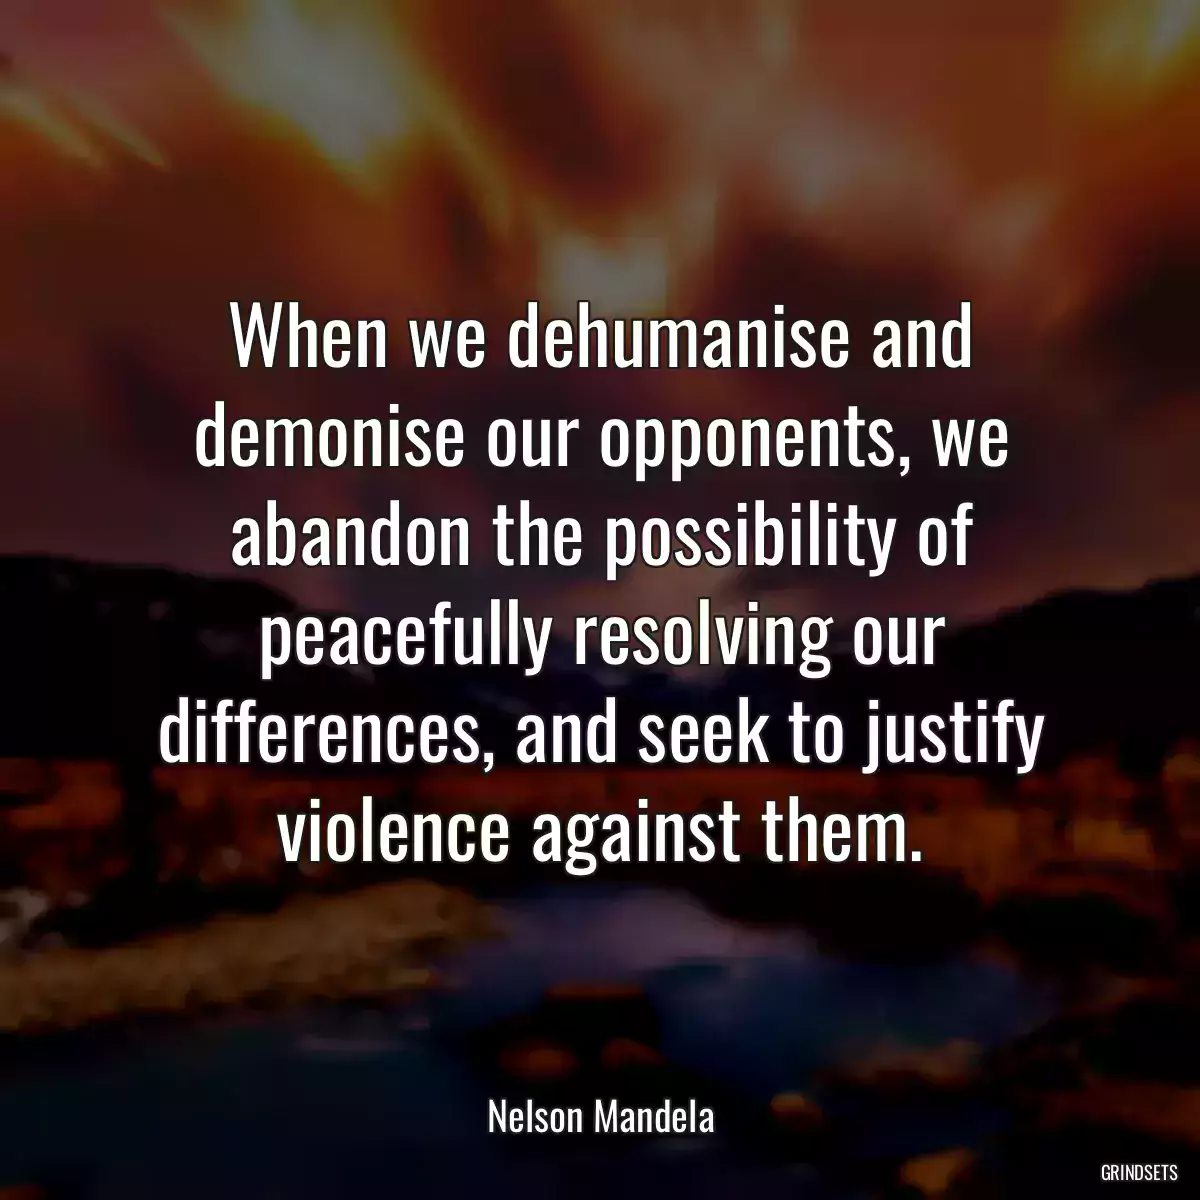 When we dehumanise and demonise our opponents, we abandon the possibility of peacefully resolving our differences, and seek to justify violence against them.